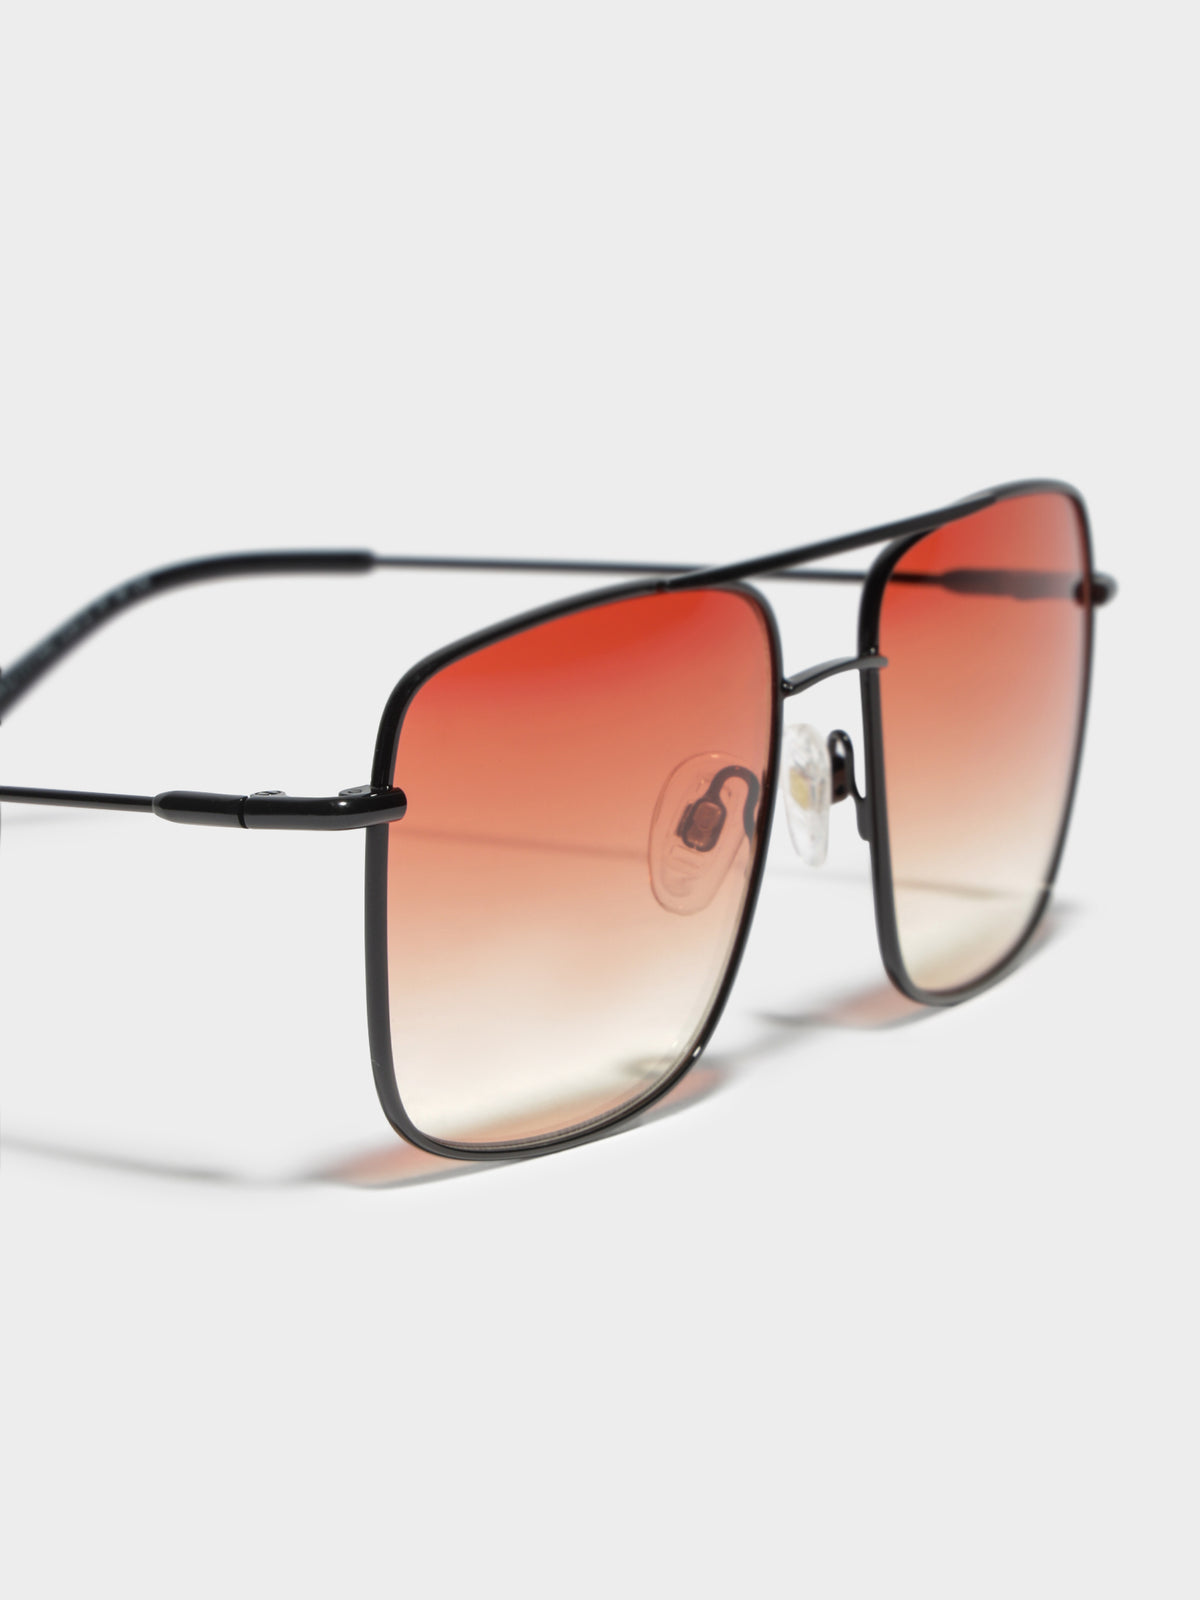 CL686201 Reaction Sunglasses in Black Sunset